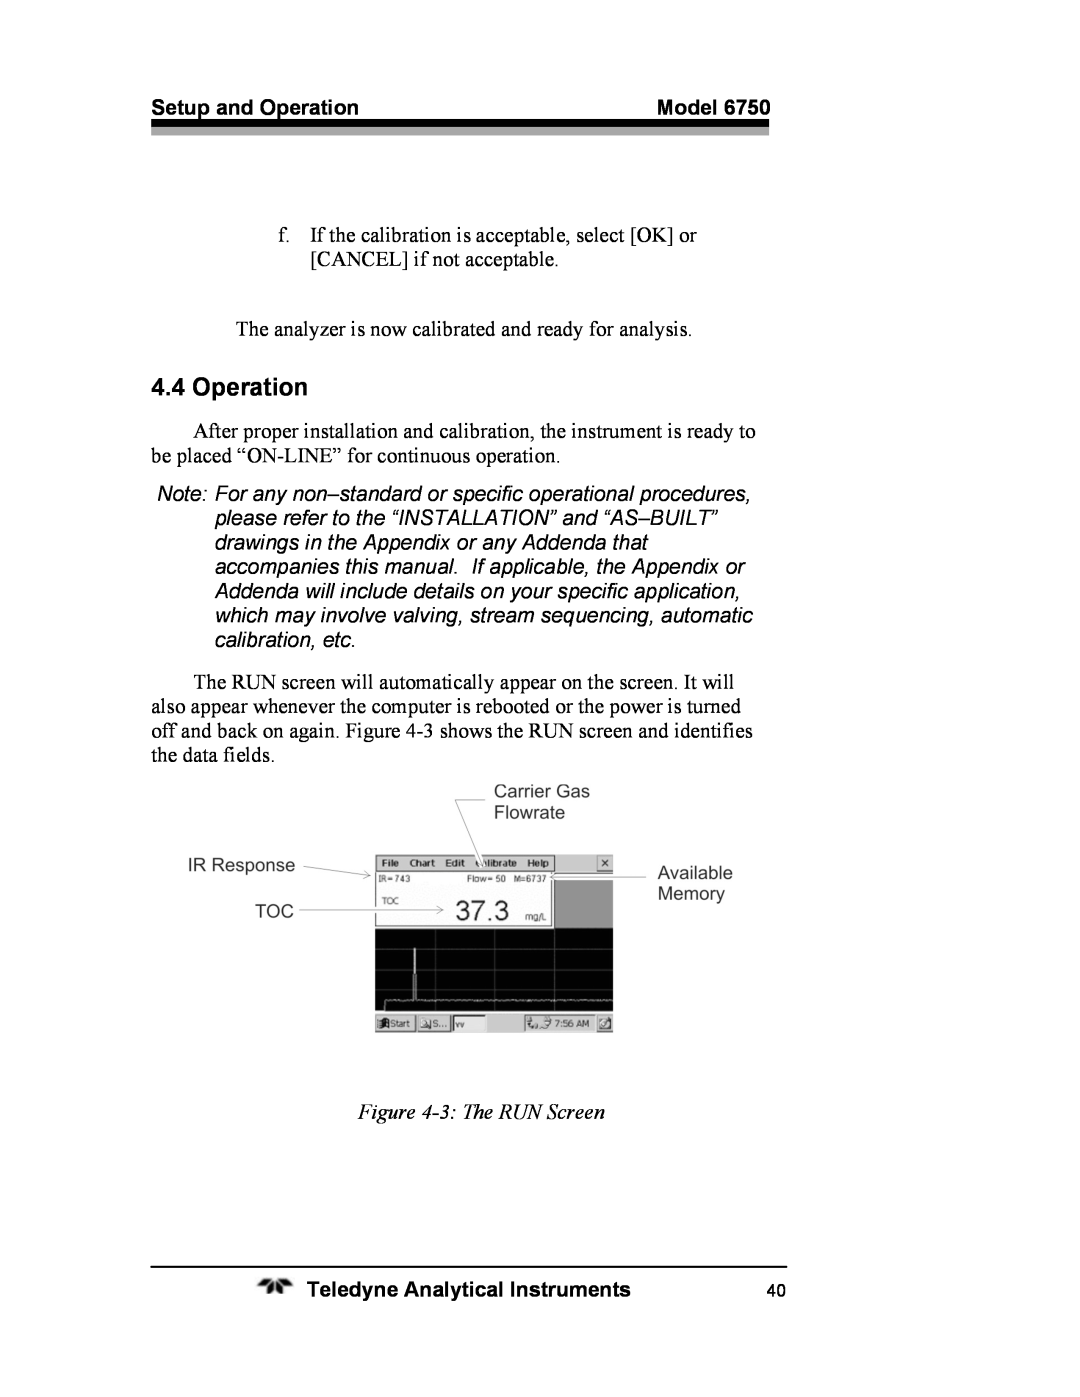 Teledyne 6750 operating instructions Operation, 3:The RUN Screen 